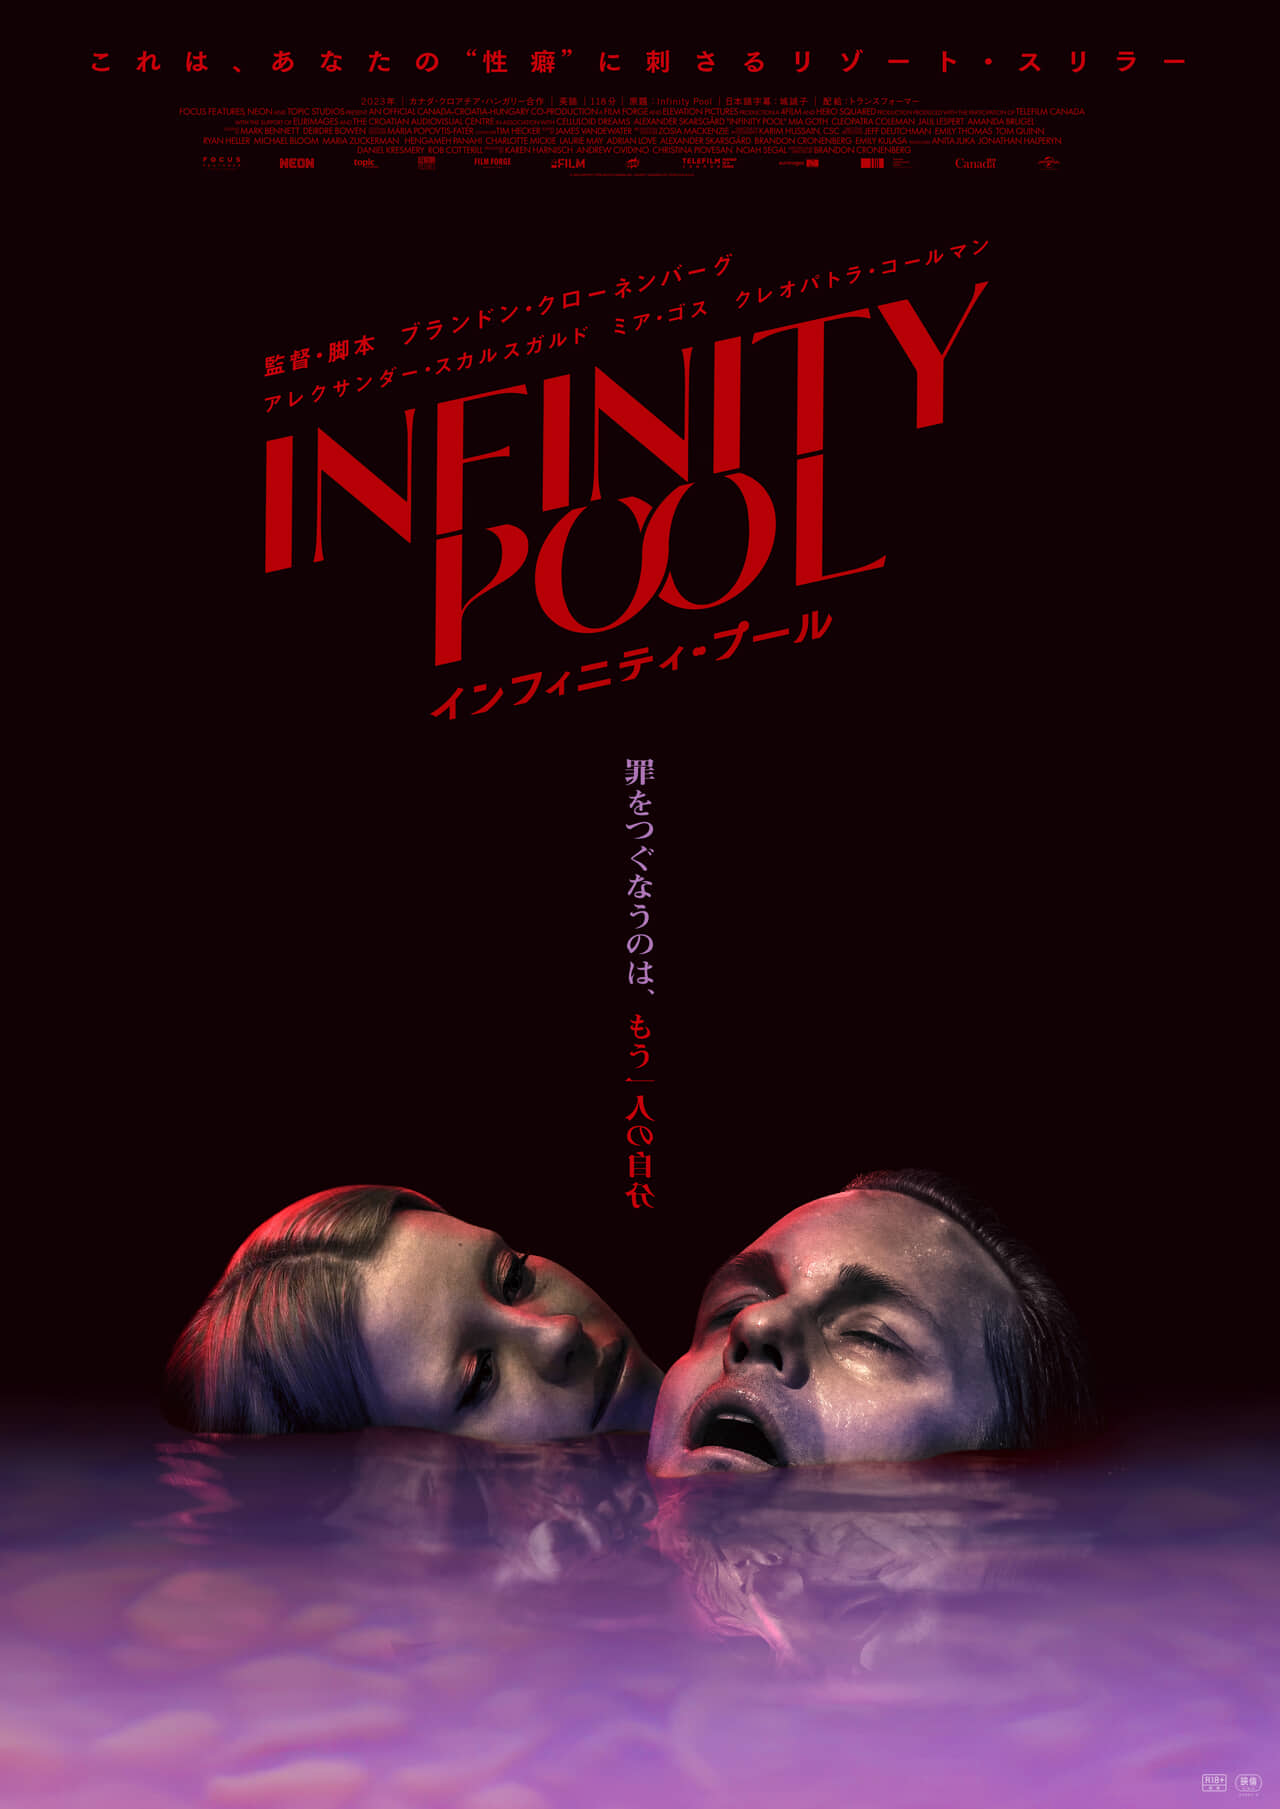 © 2022 Infinity (FFP) Movie Canada Inc., Infinity Squared KFT, Cetiri Film d.o.o. All Rights Reserved.